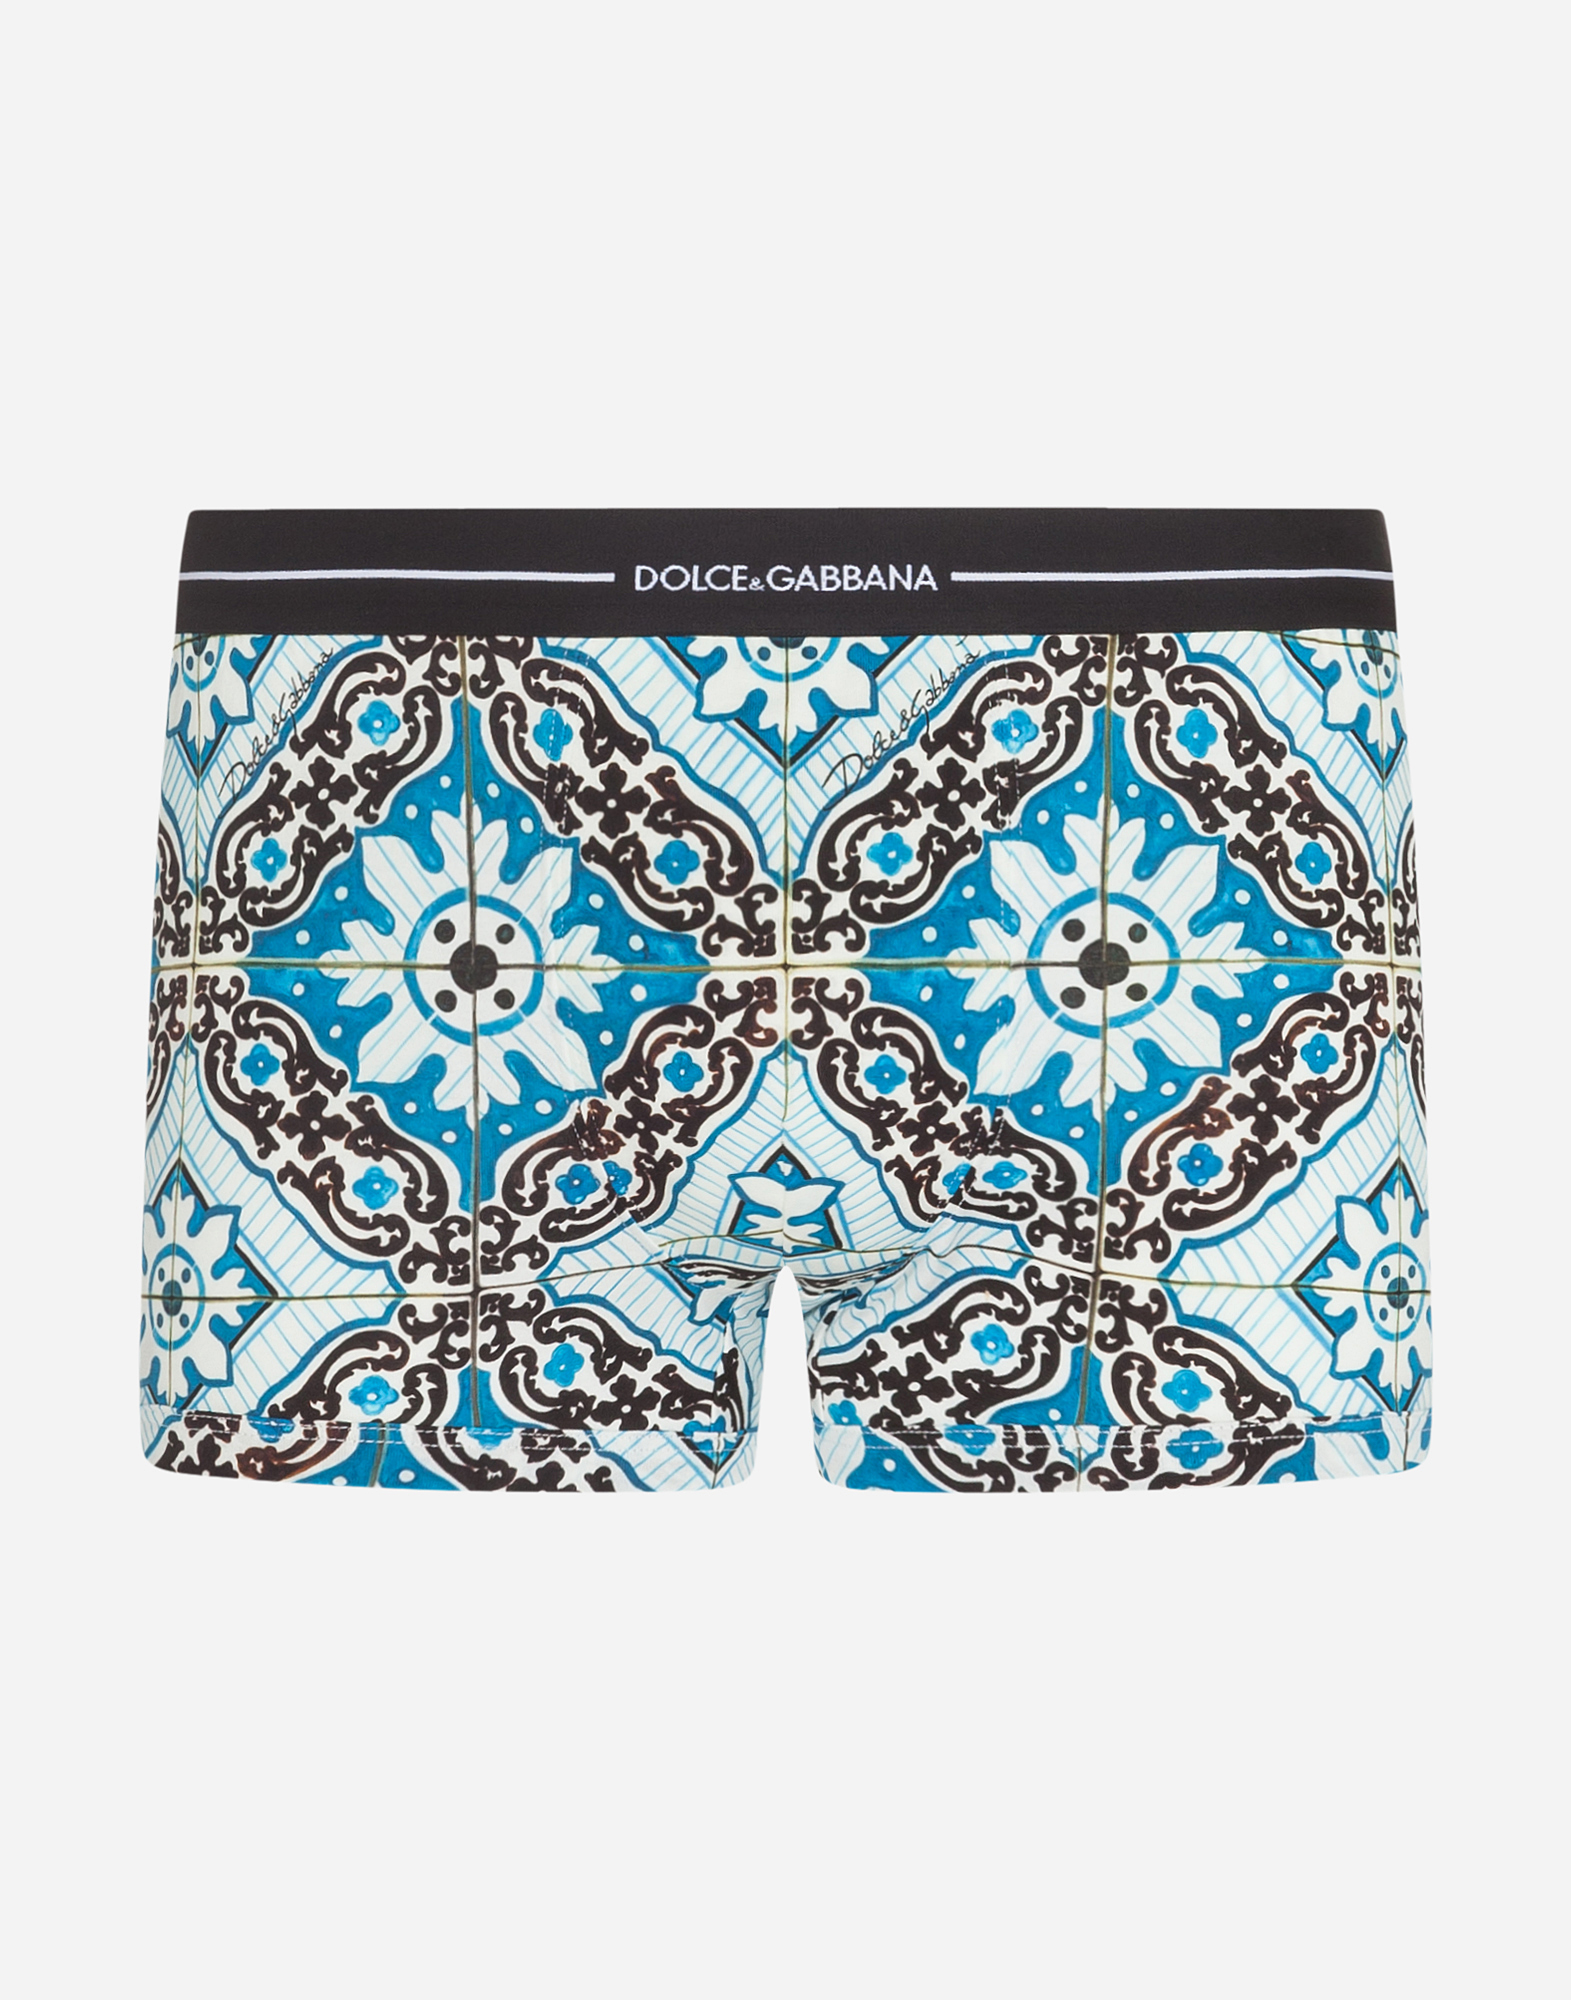 DOLCE & GABBANA Cotton boxers with maiolica print on a sky blue background